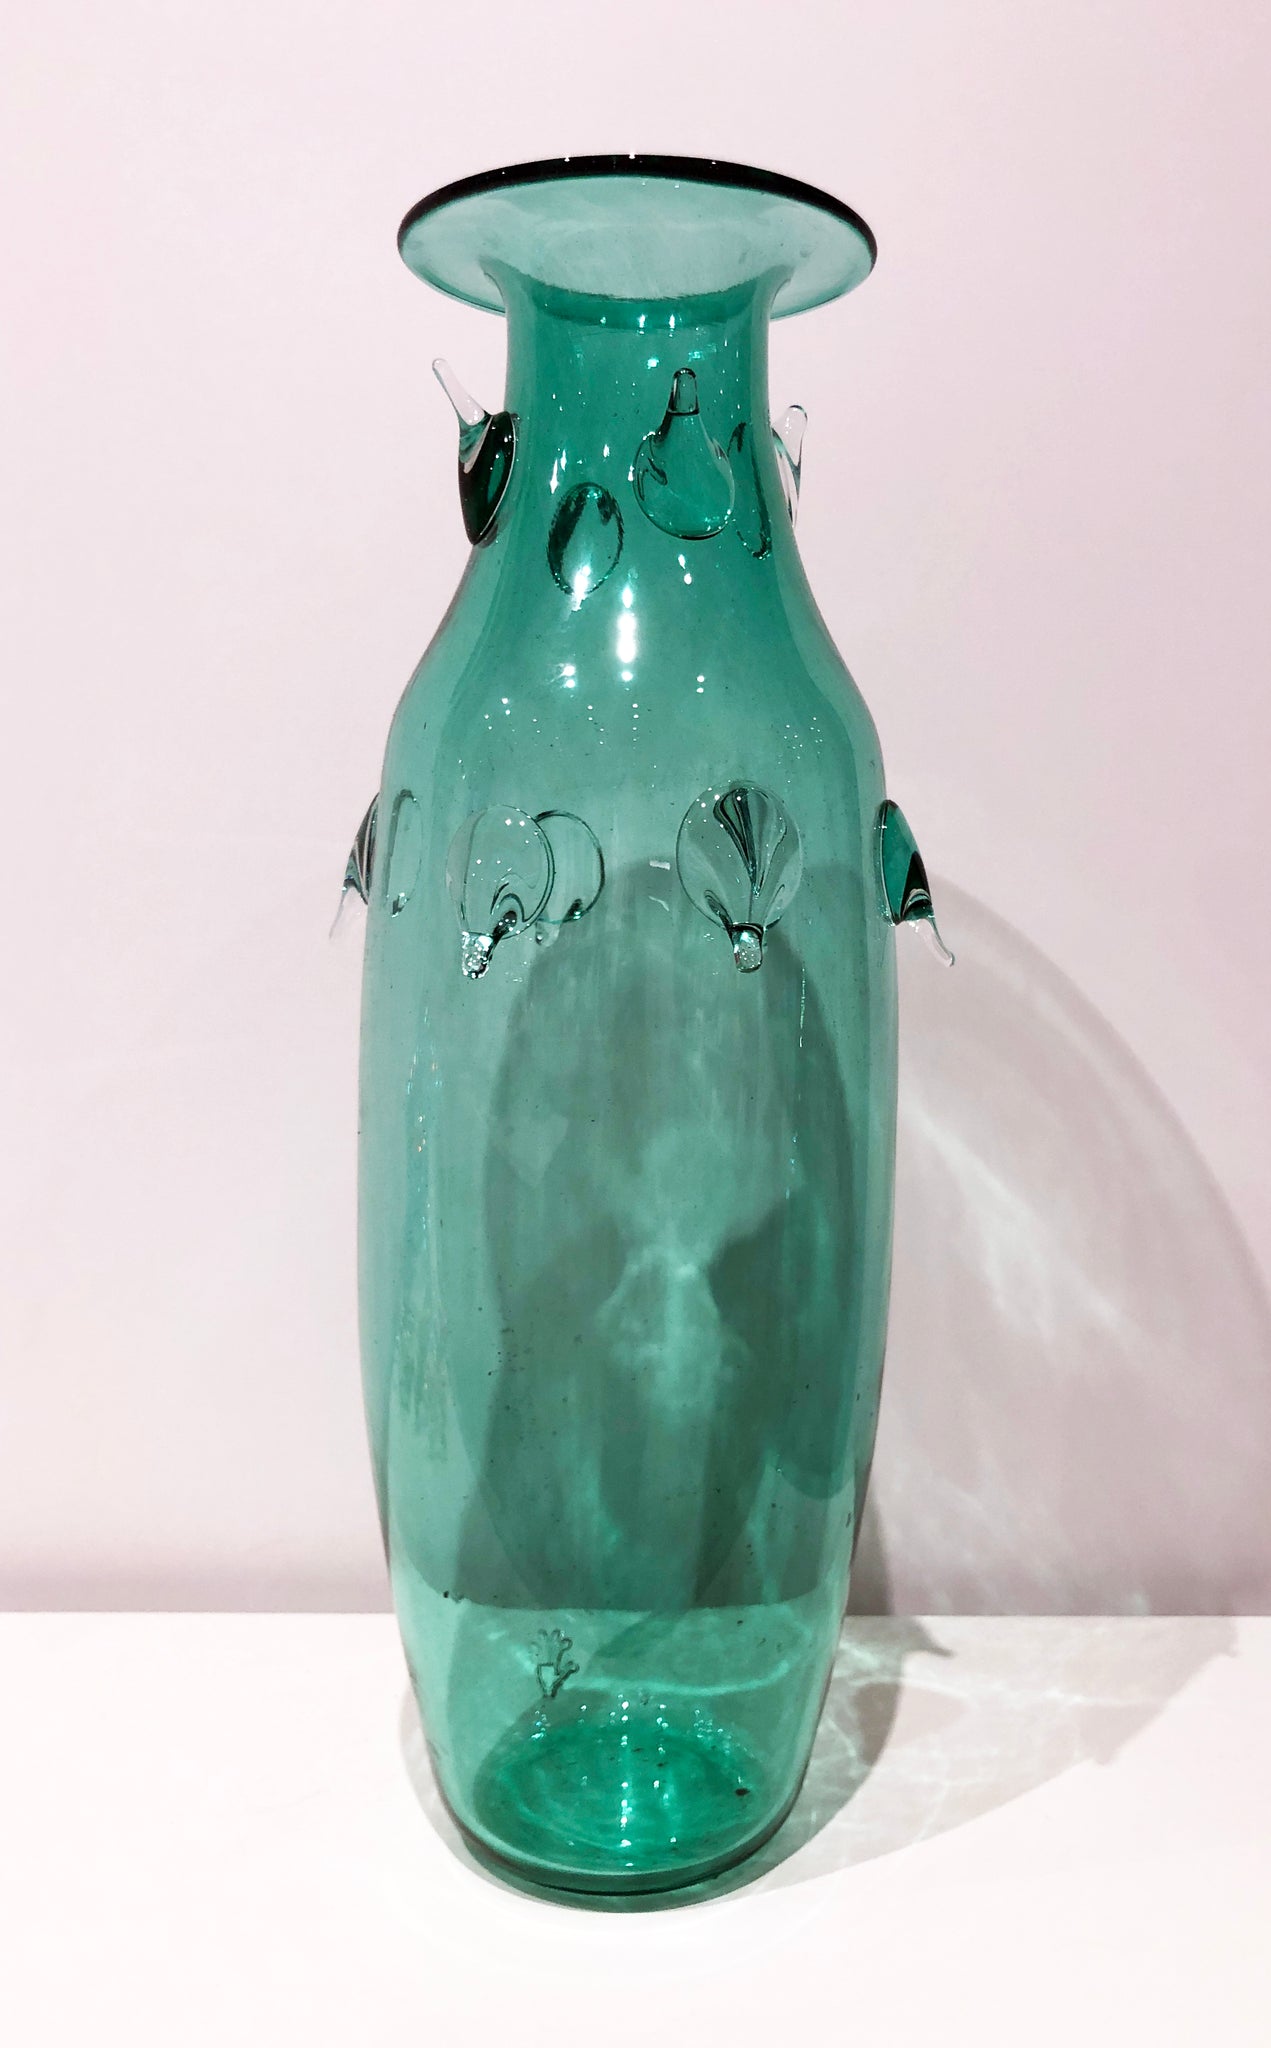 Drip Vase Large in Emerald - The Brant Foundation Shop